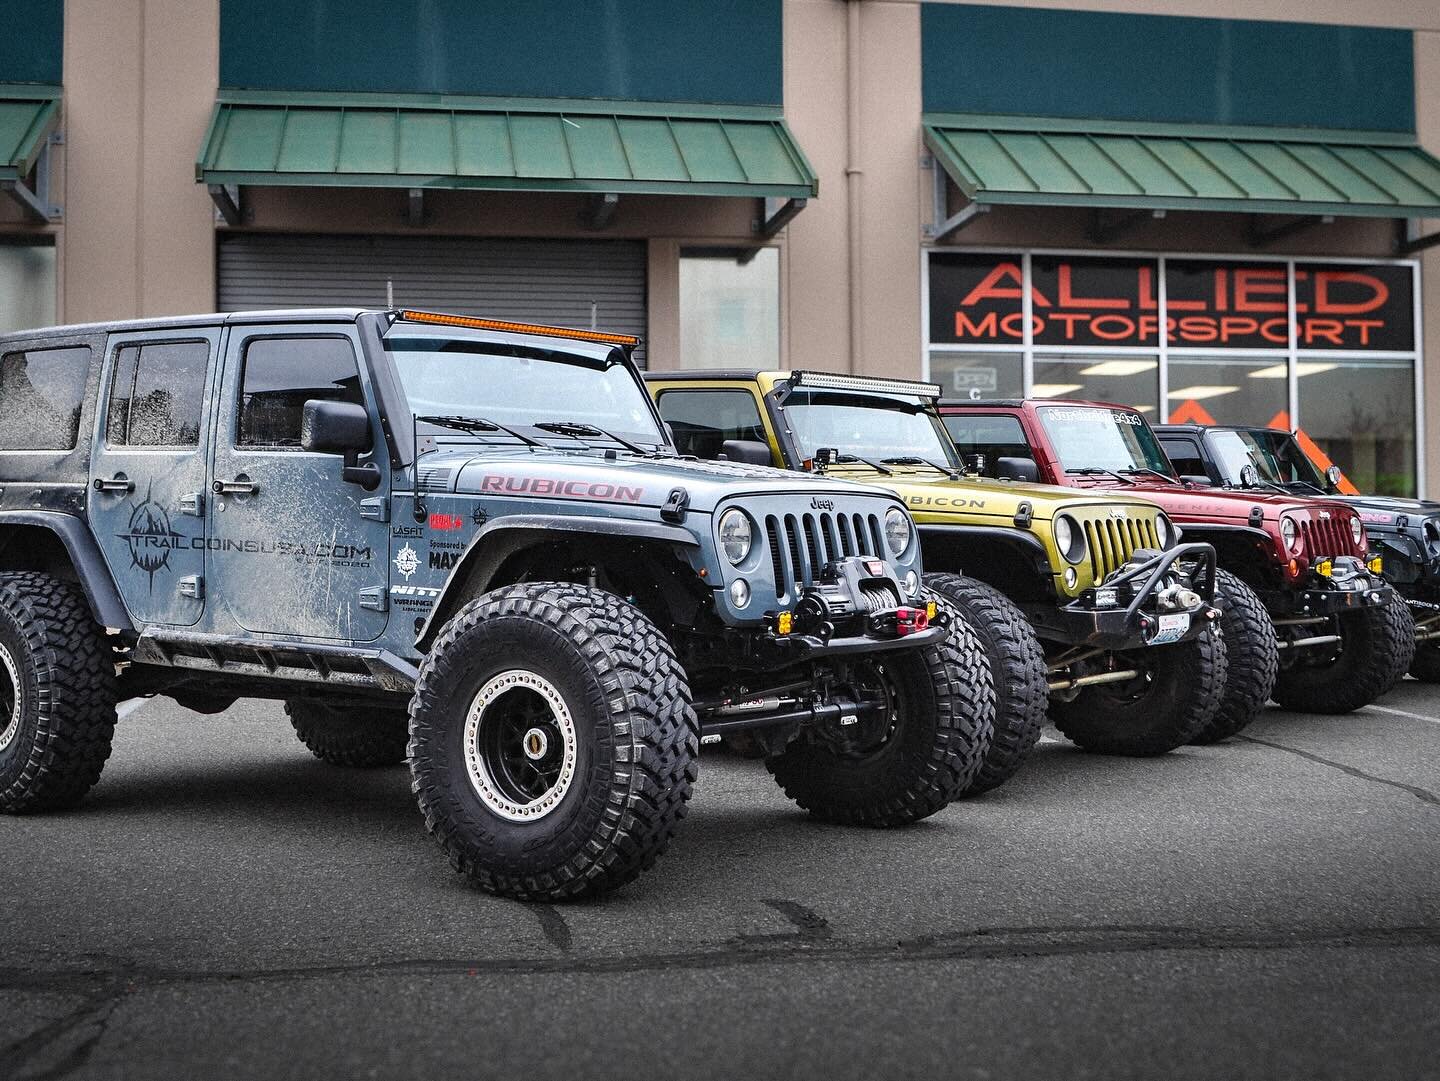 Supporting friends and off-road enthusiasts is our bread and butter.

This weekend we made our way up north to Snohomish Wa to visit a new off-road shop @allied_motorsport 

These people are 4x4 enthusiasts. There is a vast amount of knowledge and ex